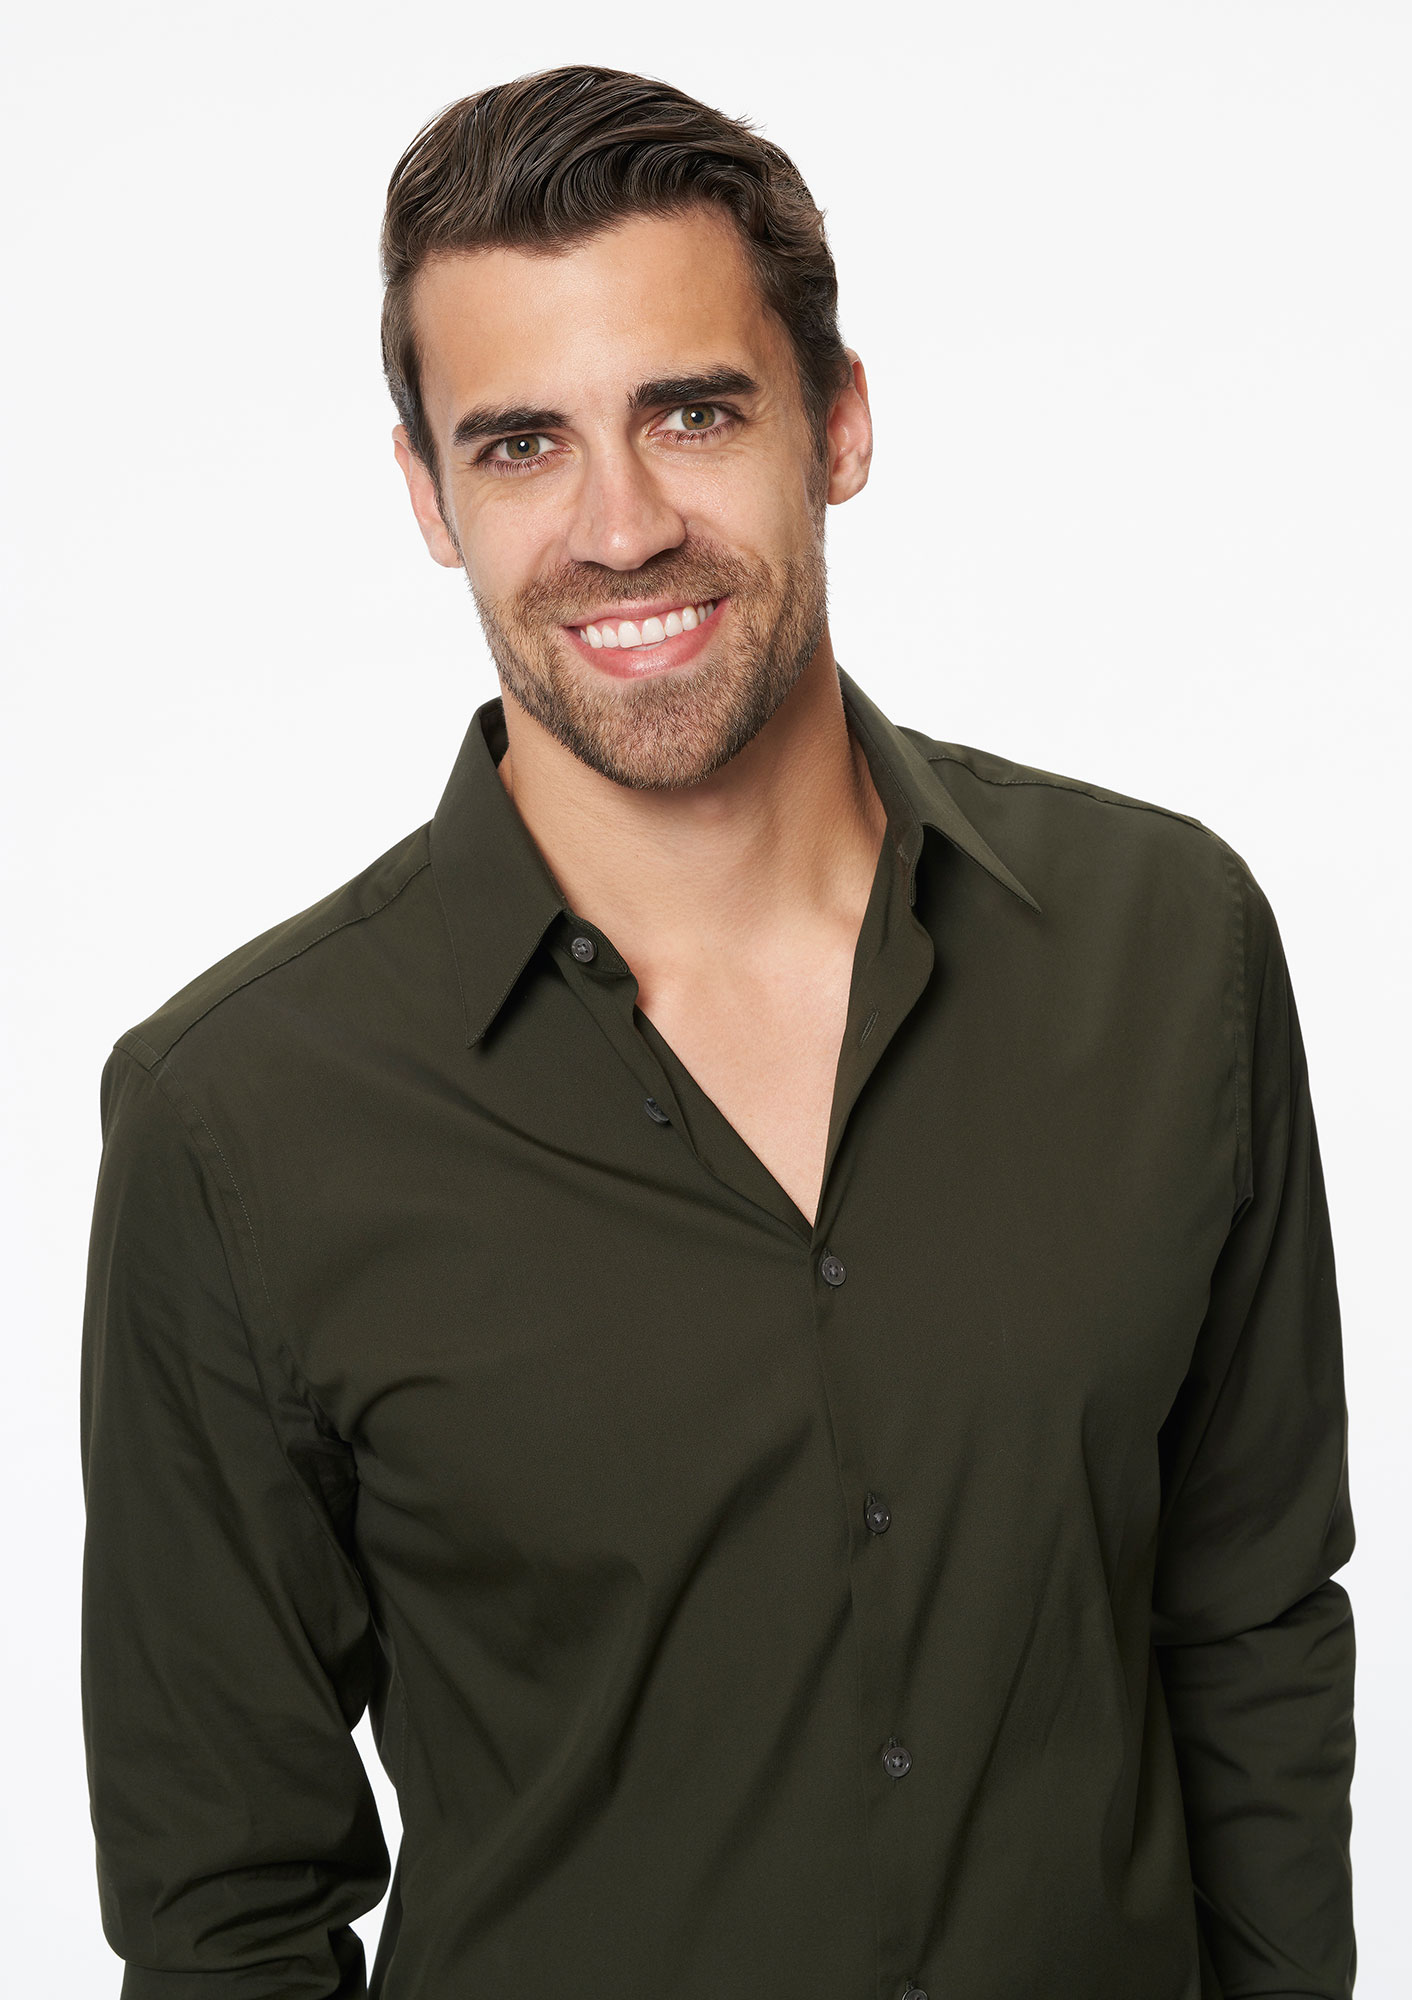 Who Is Bachelorettes Rick Leach 5 Things to Know About the Contestant Who Met Michelle Young on a Silver Platter